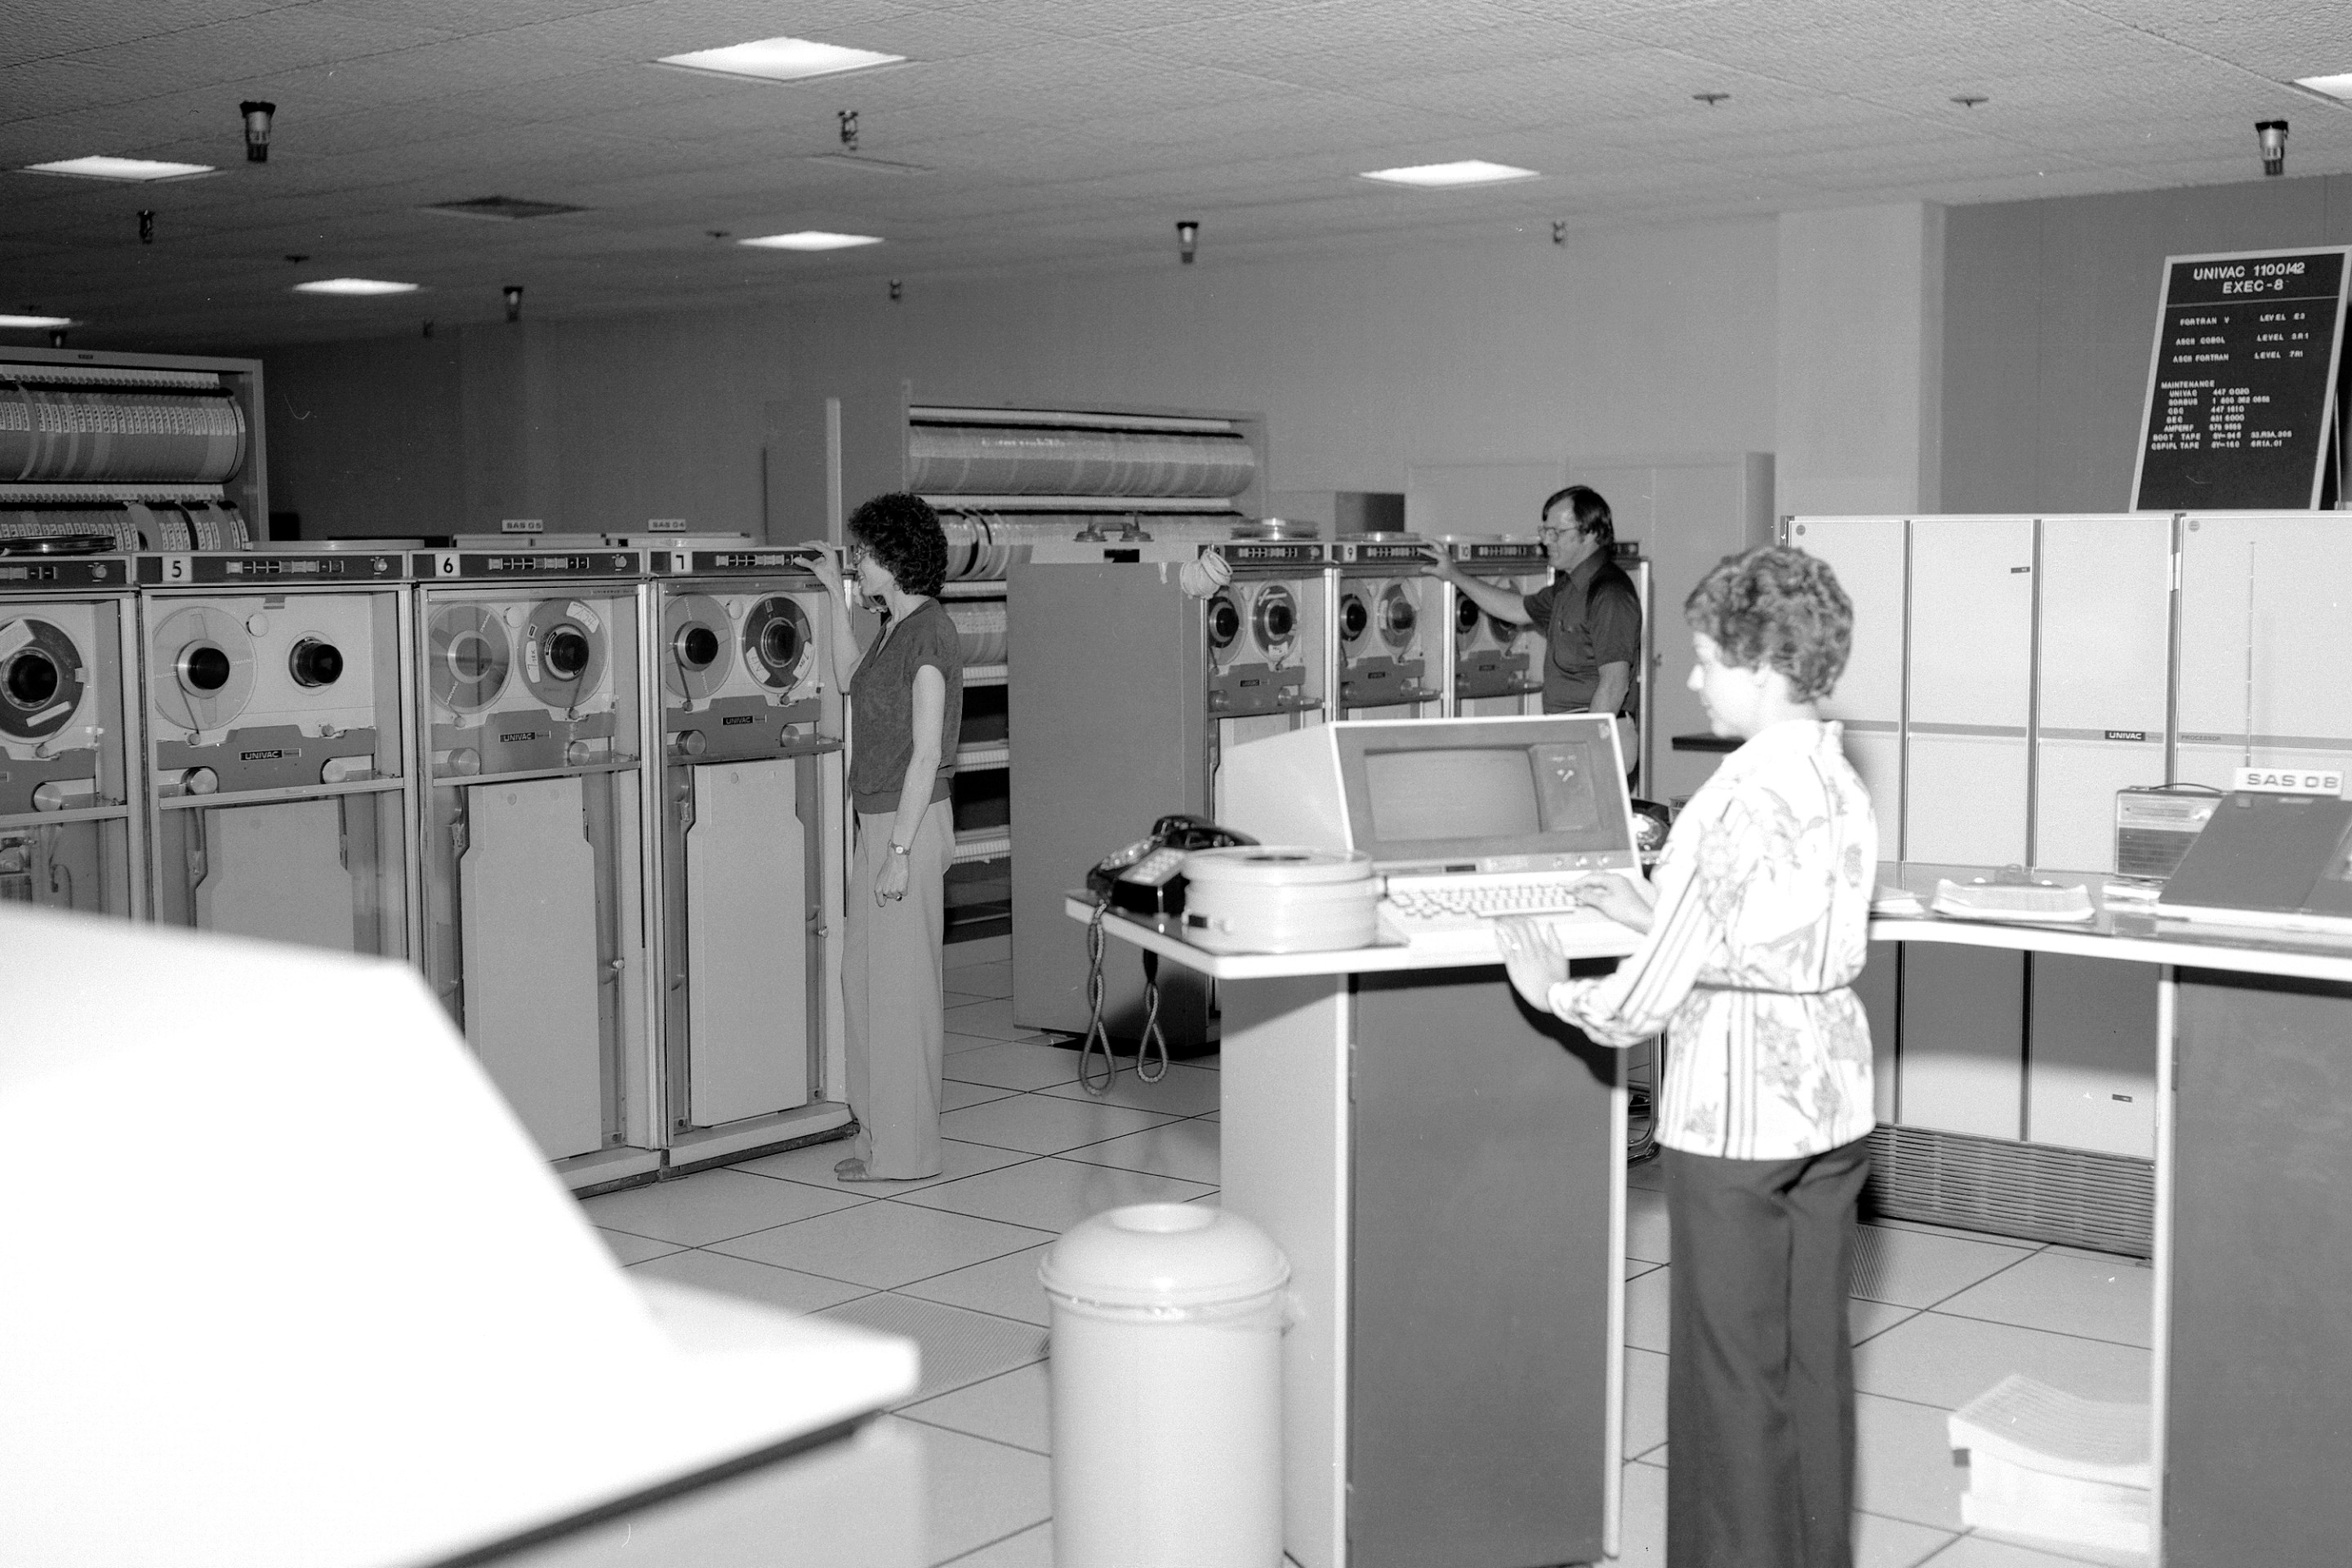 Computer room and workers ca. 1980. (Photo by: HUM Images/Universal Images Group via Getty Images)